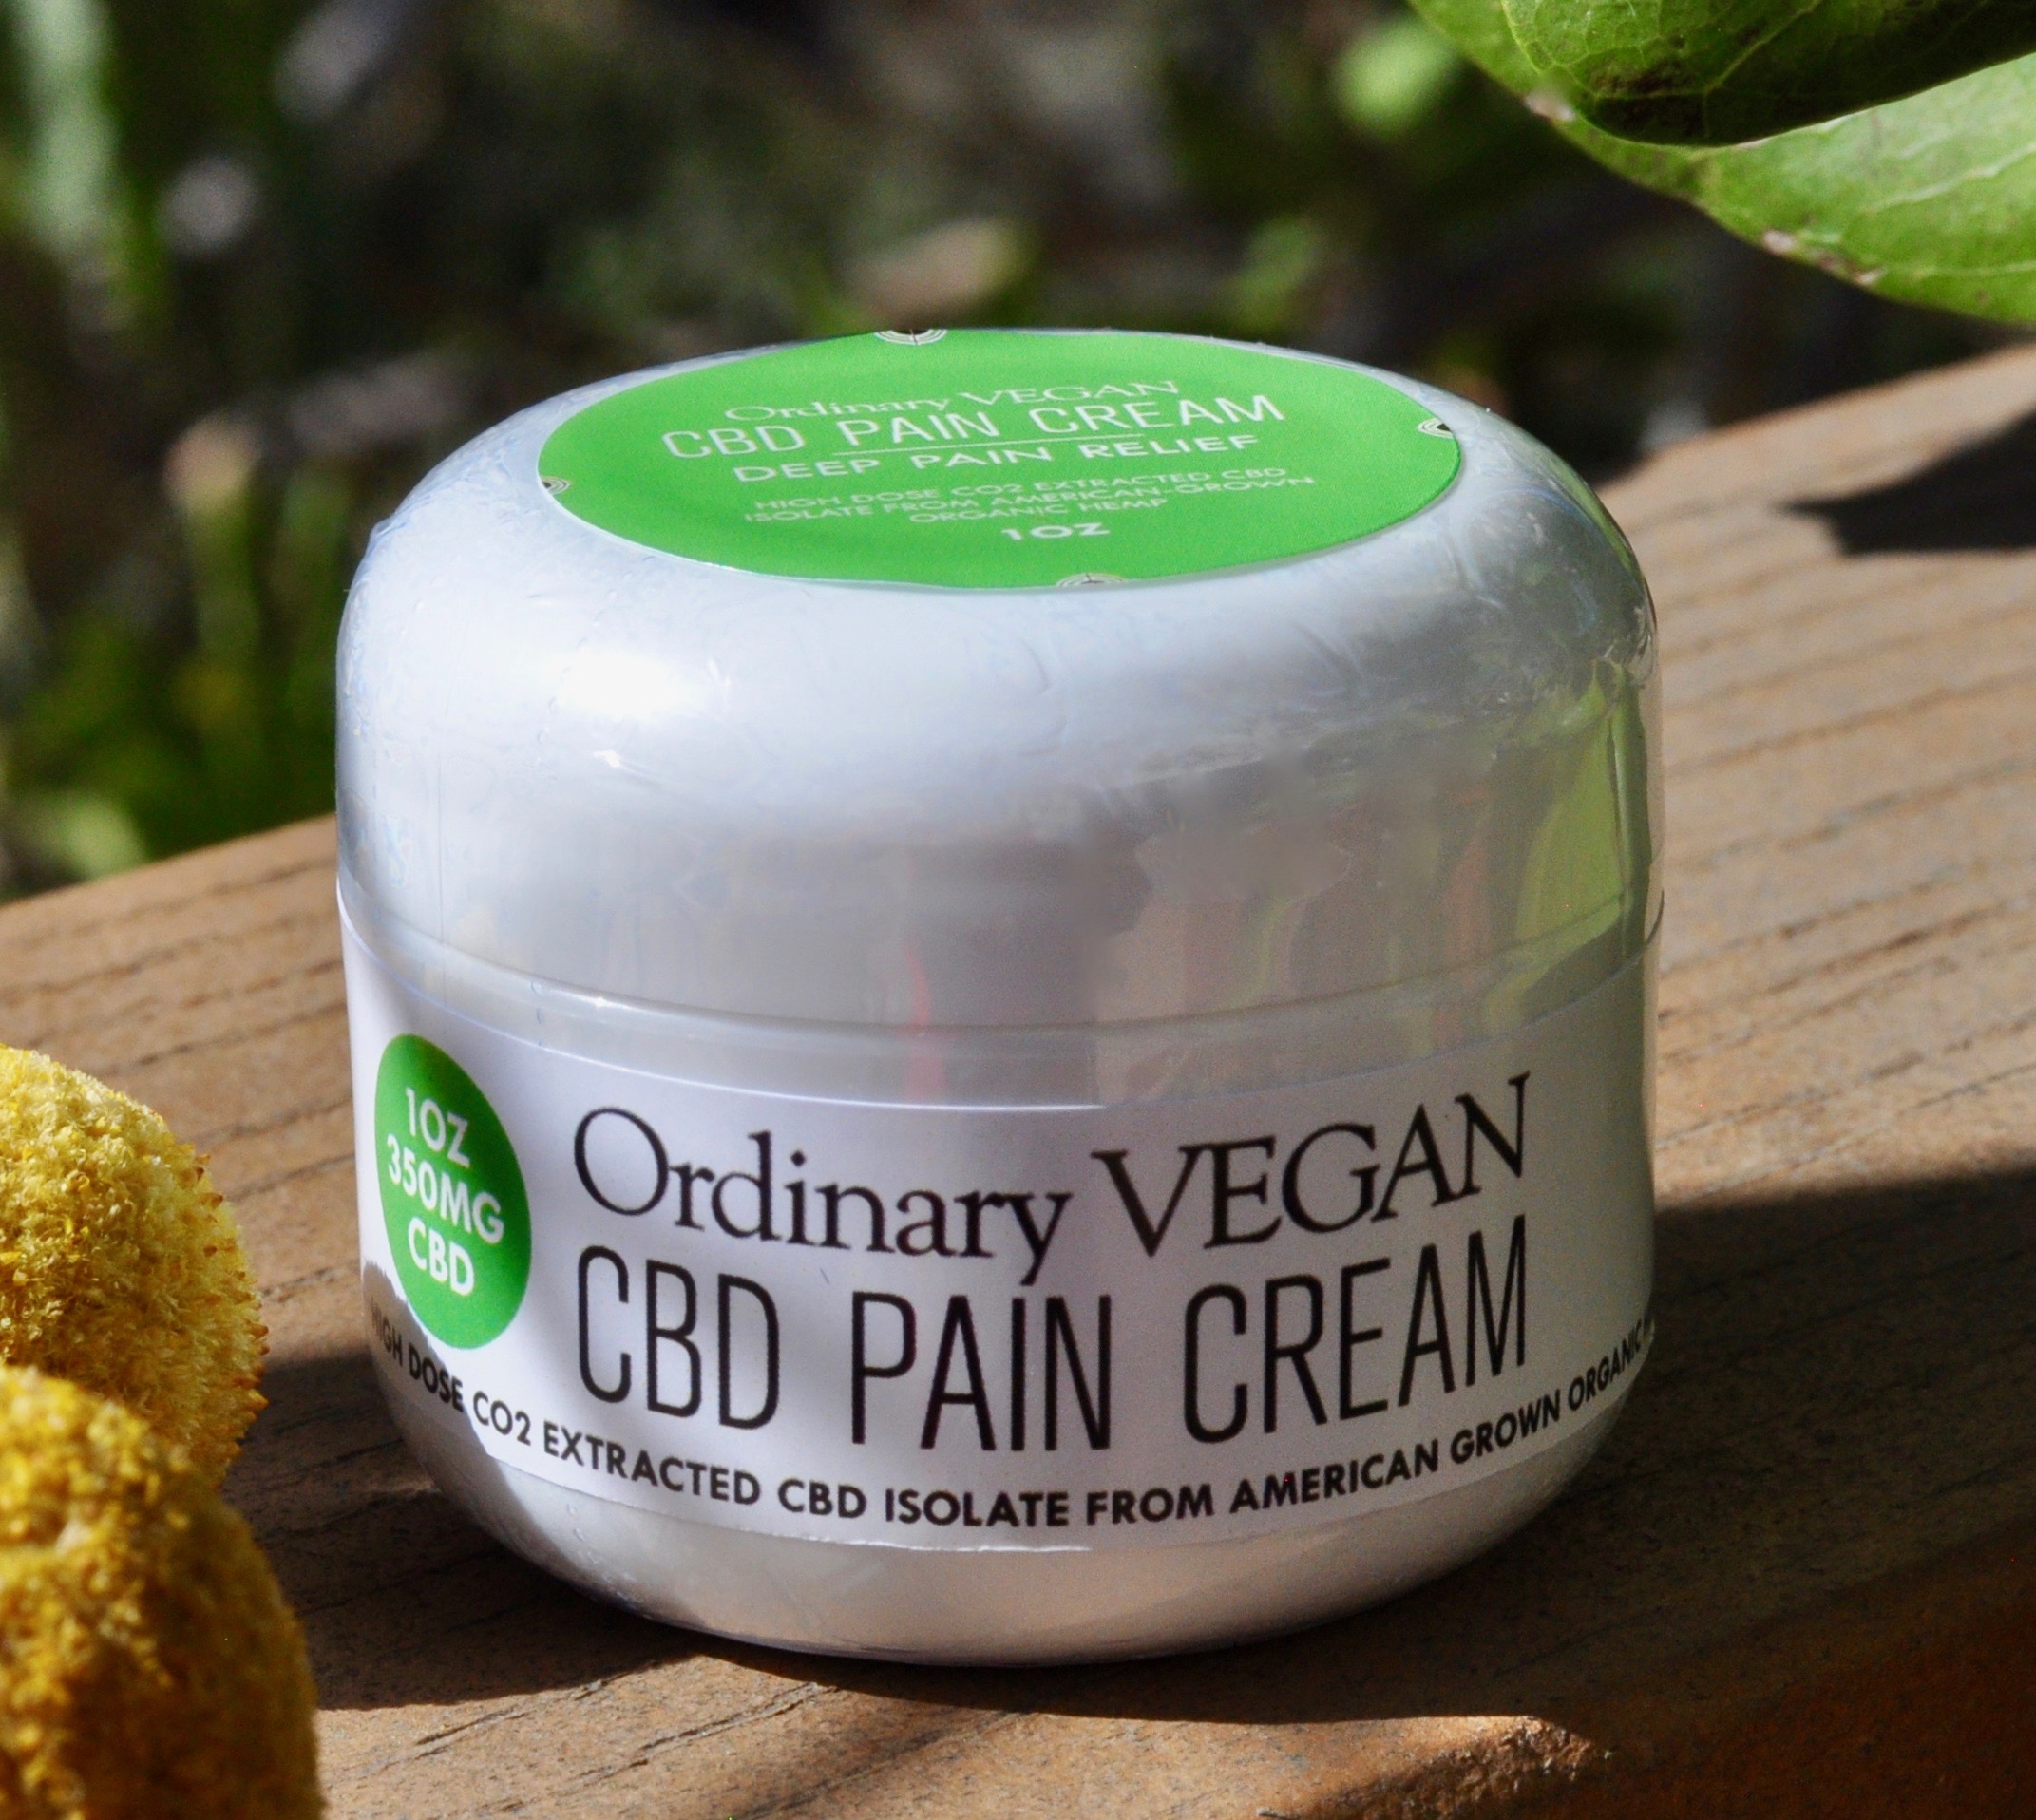 CBD pain cream formulated for sore muscle areas to heal inflammation and reduce pain. (#vegan) www.ordinaryvegan.net